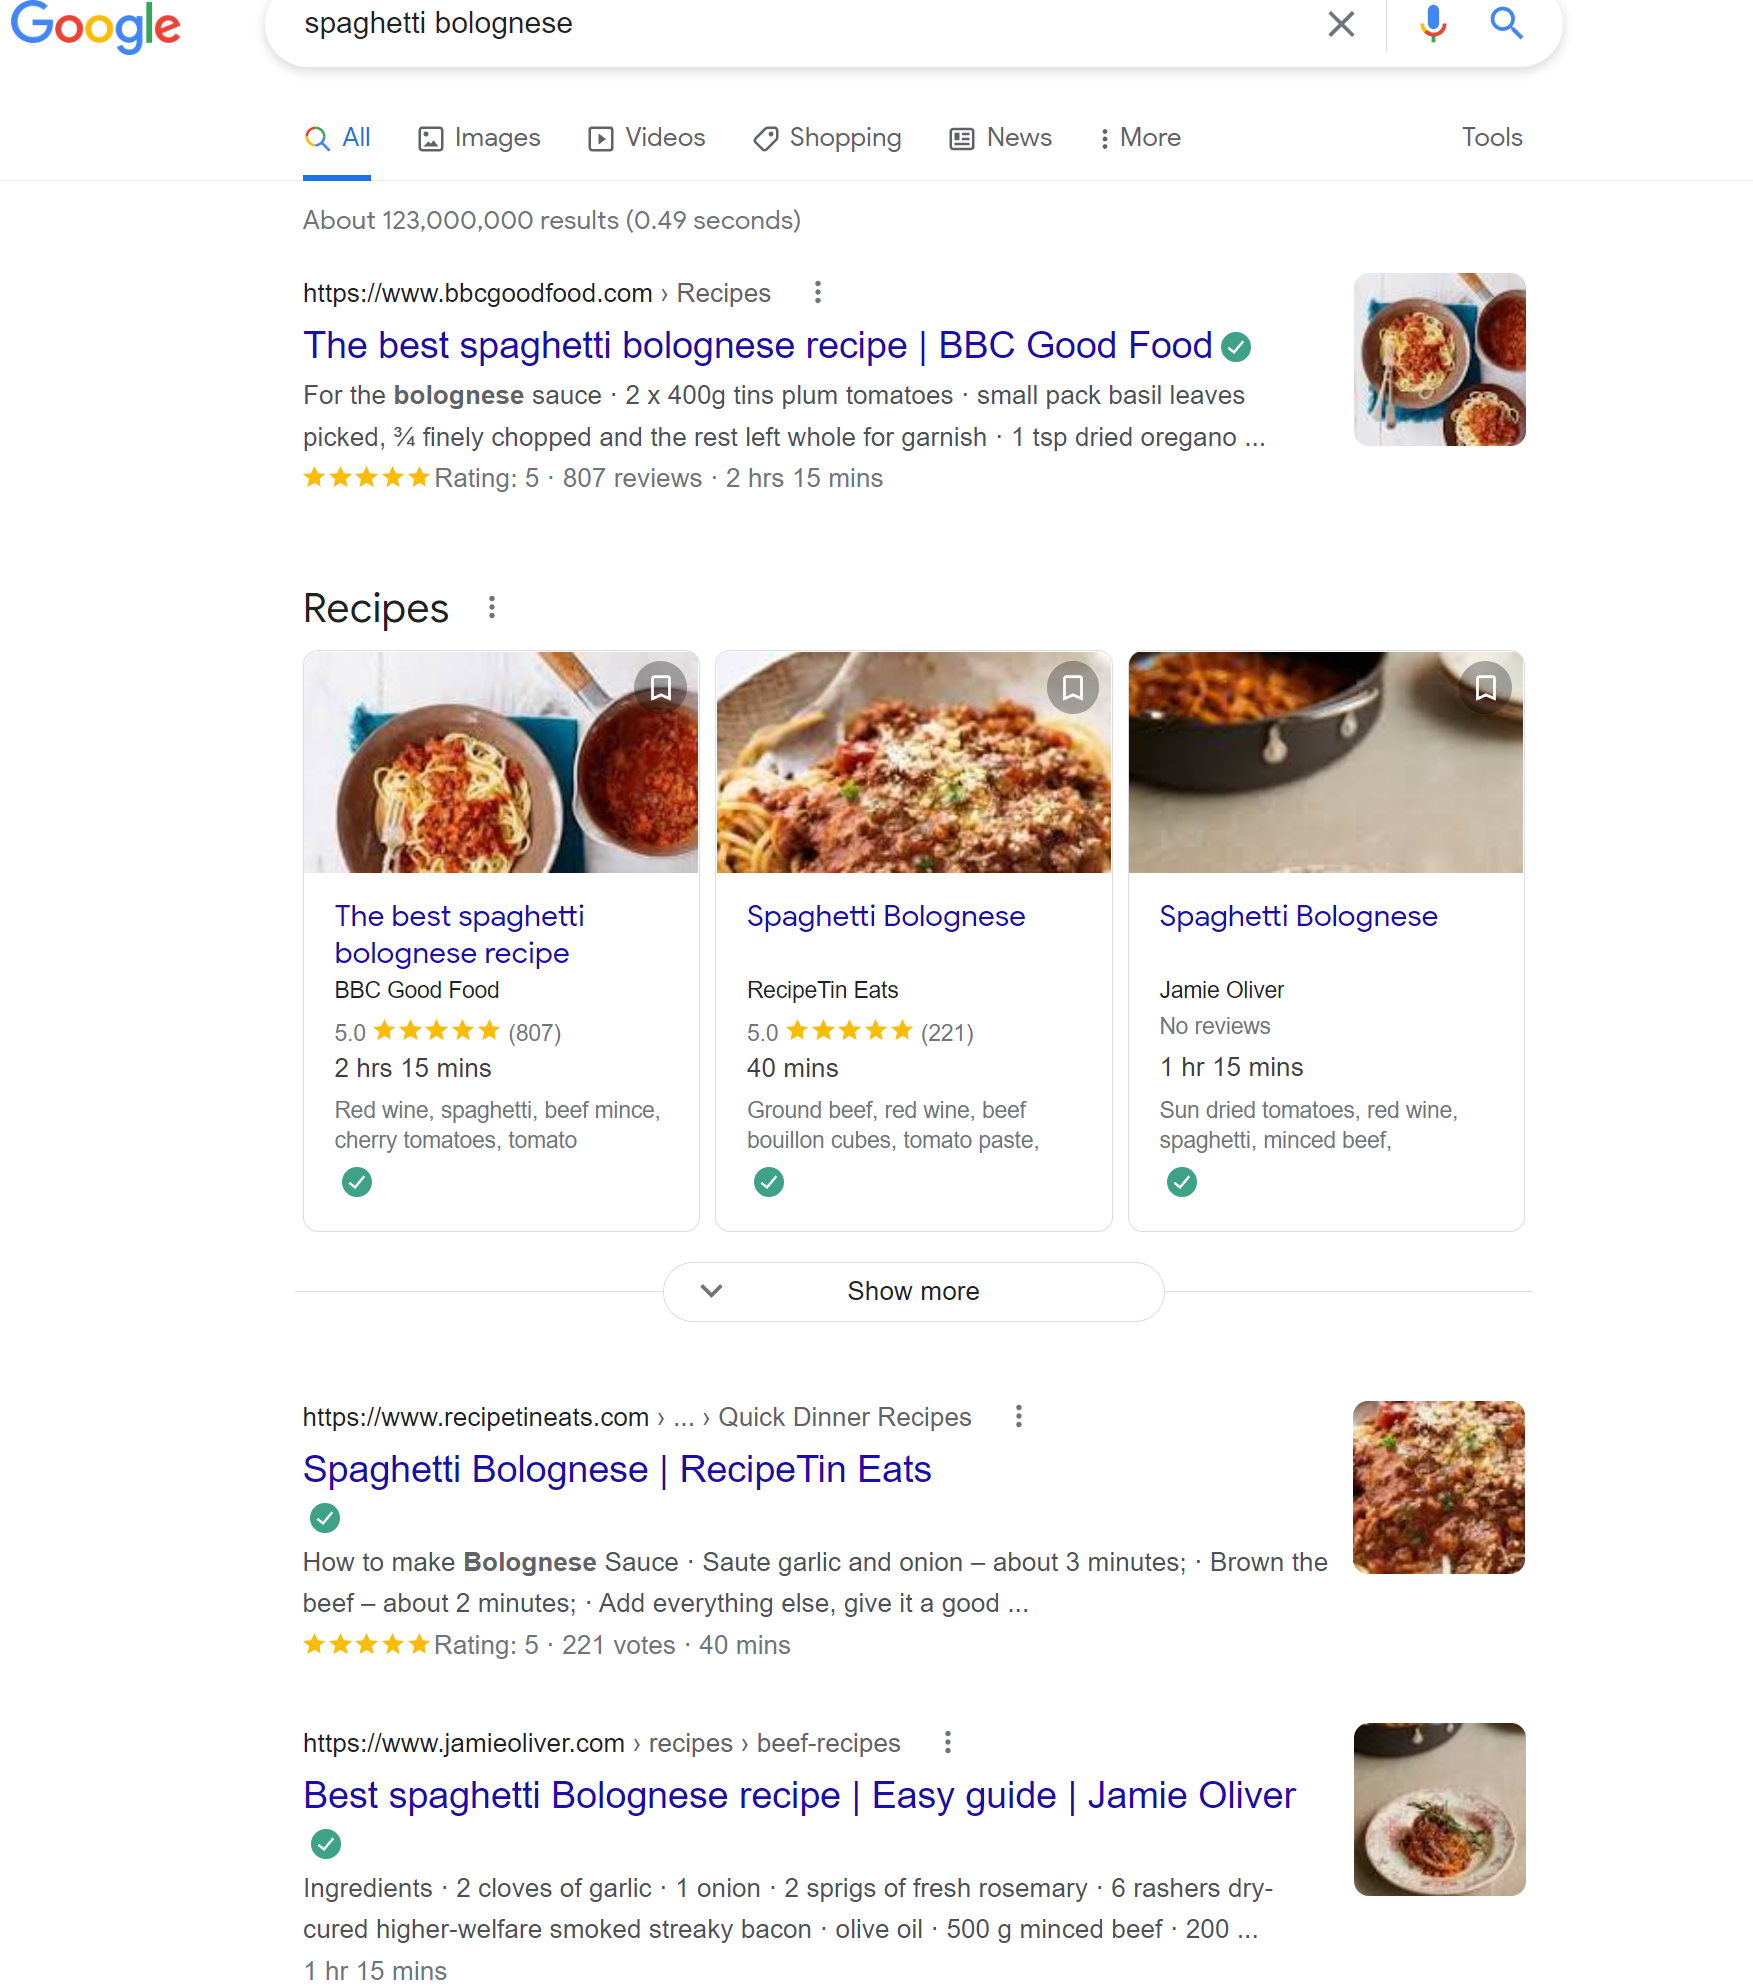 Google results page for spaghetti bolognese an example of informational search intent image